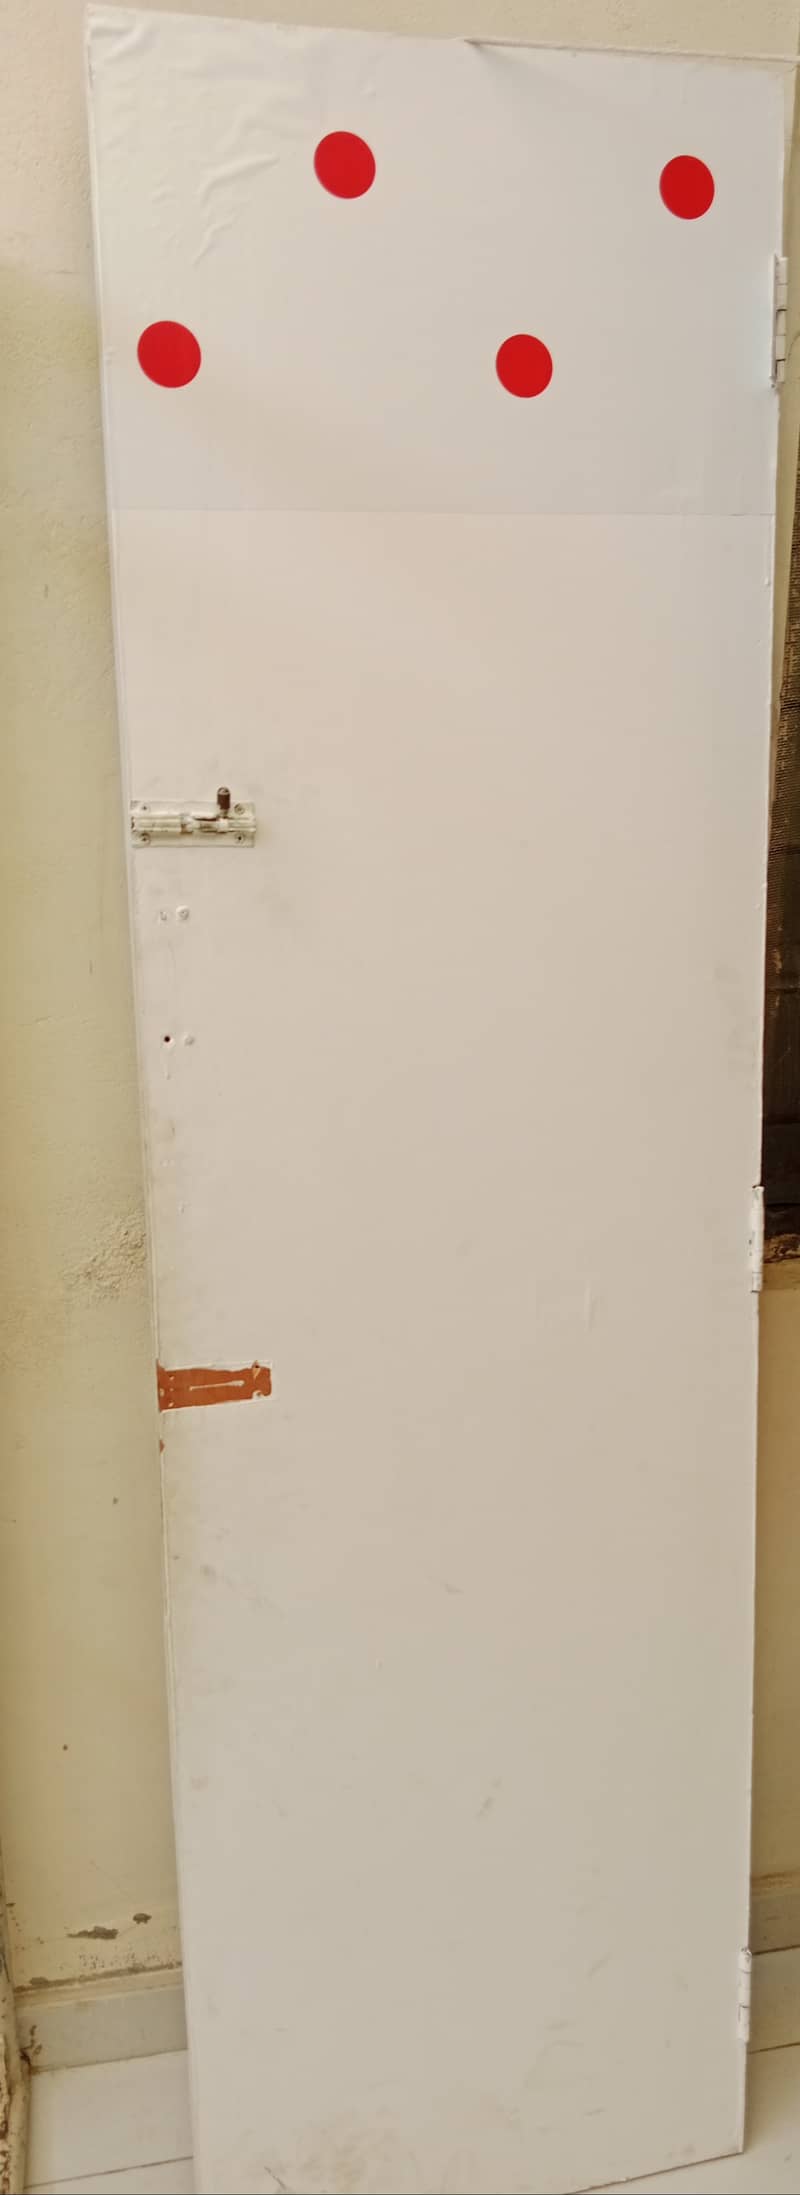 Door for sale neat and clean only WhatsUp 03060103003 7